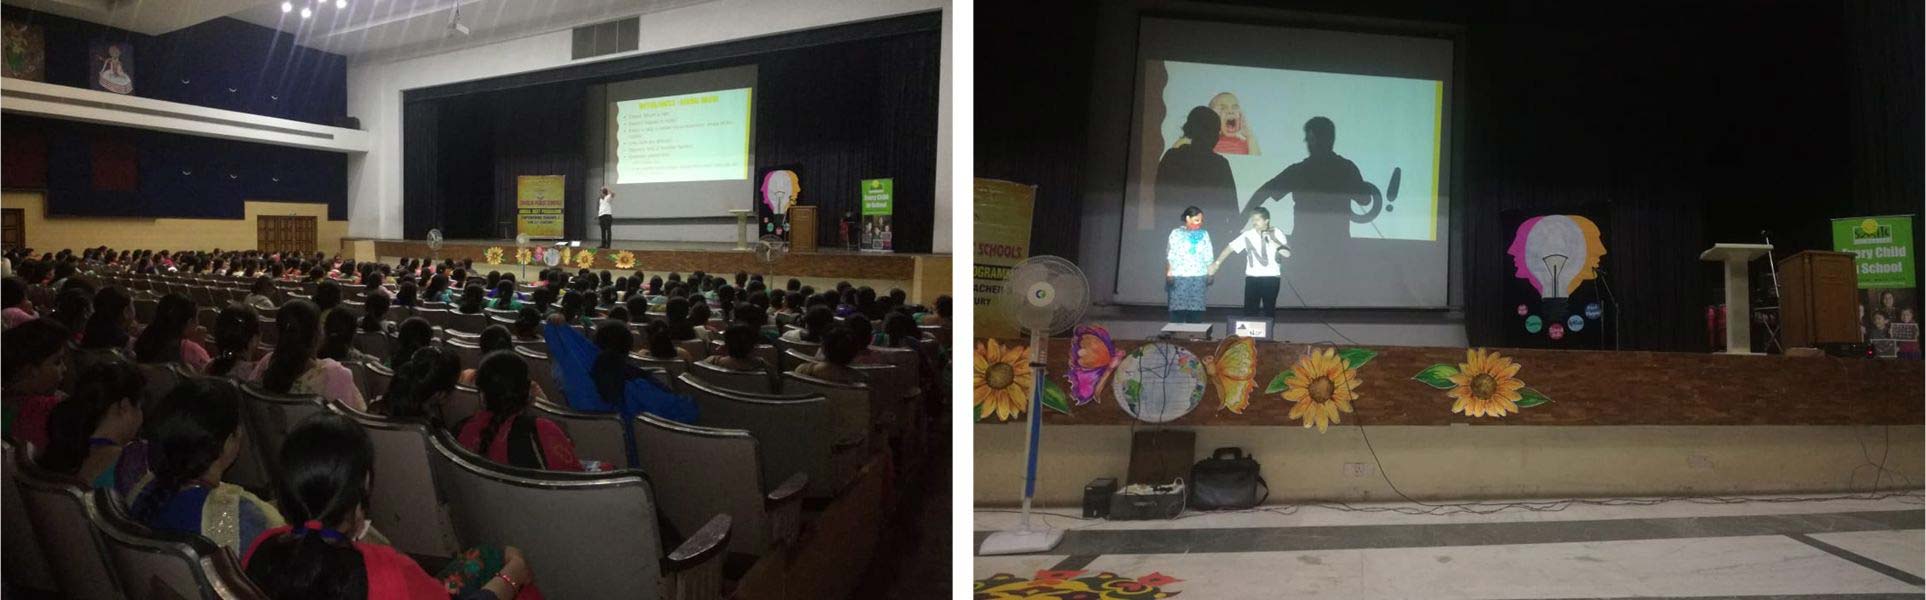 Workshop for child sexual abuse conducted in school